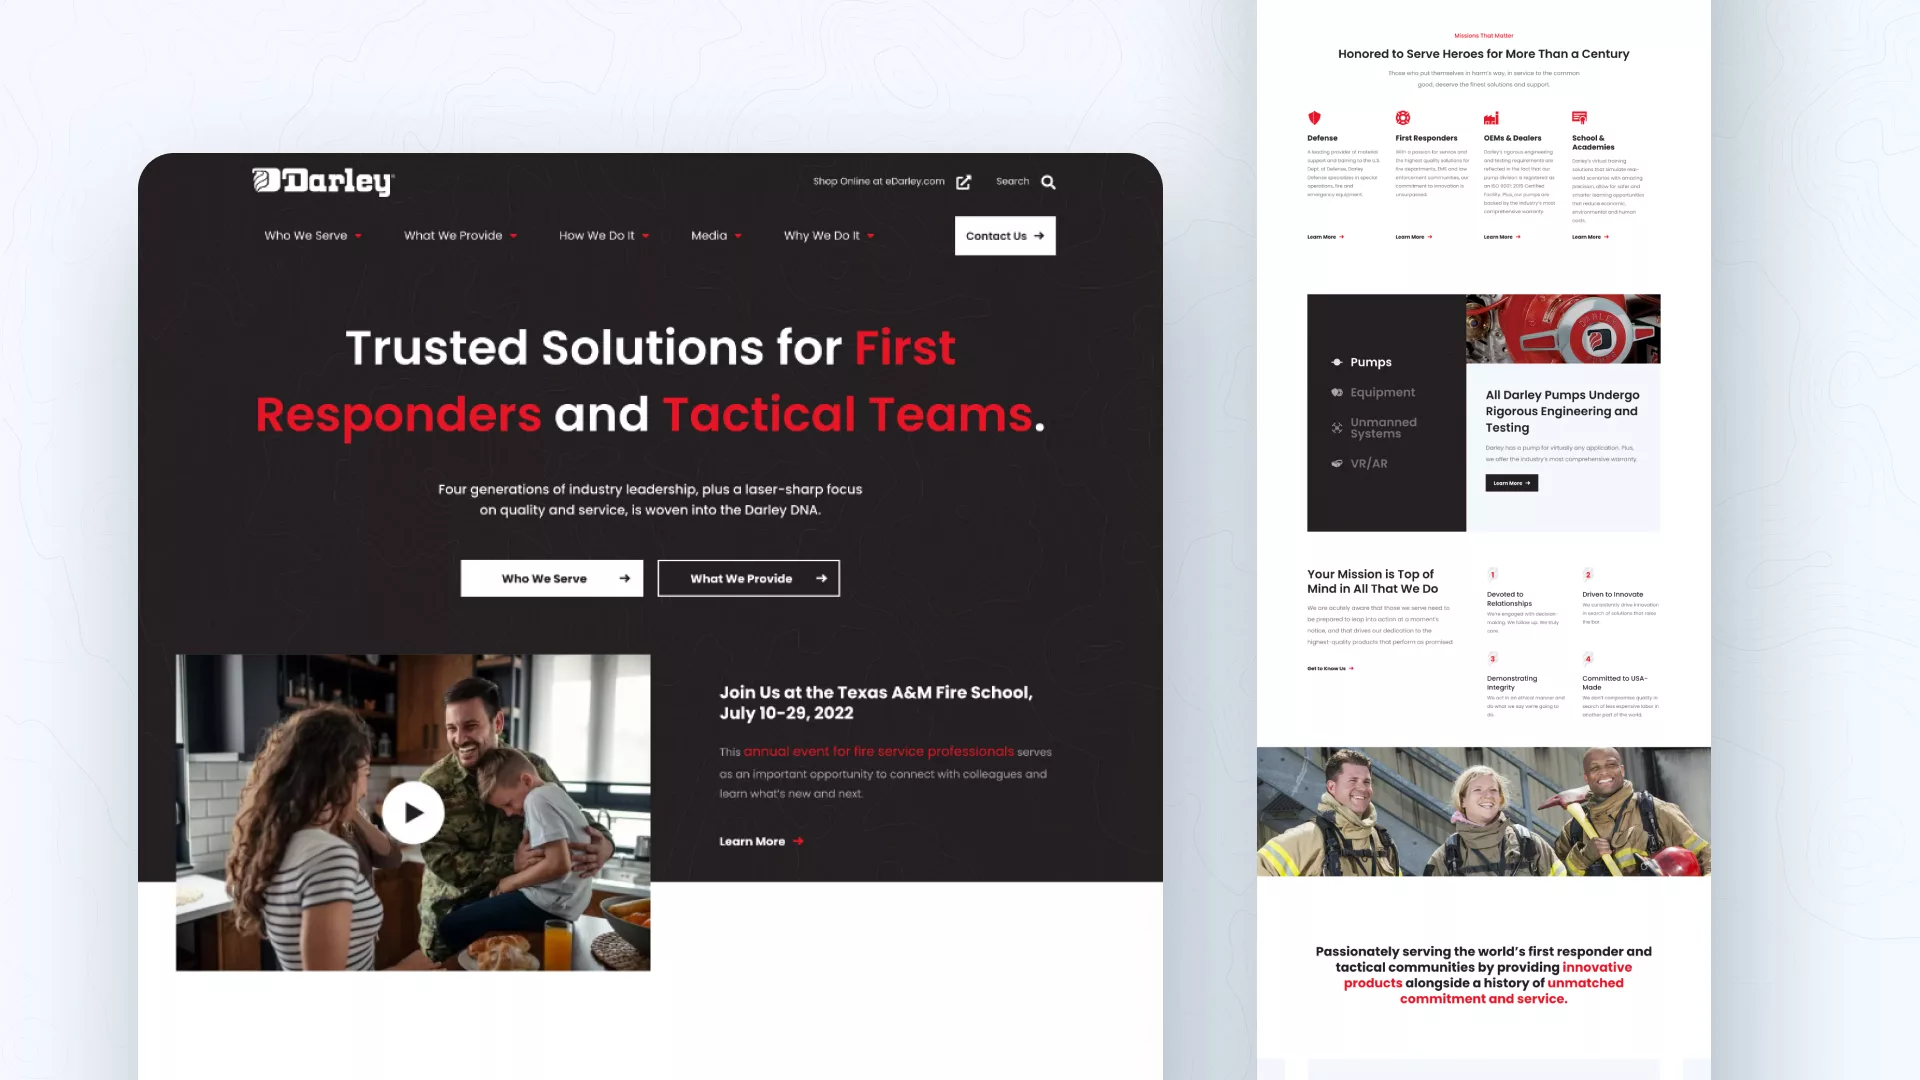 A graphic showcasing the layout design of Darley's website, with the words "Trusted Solutions for First Responders and Tactical Teams" at the center of the page.